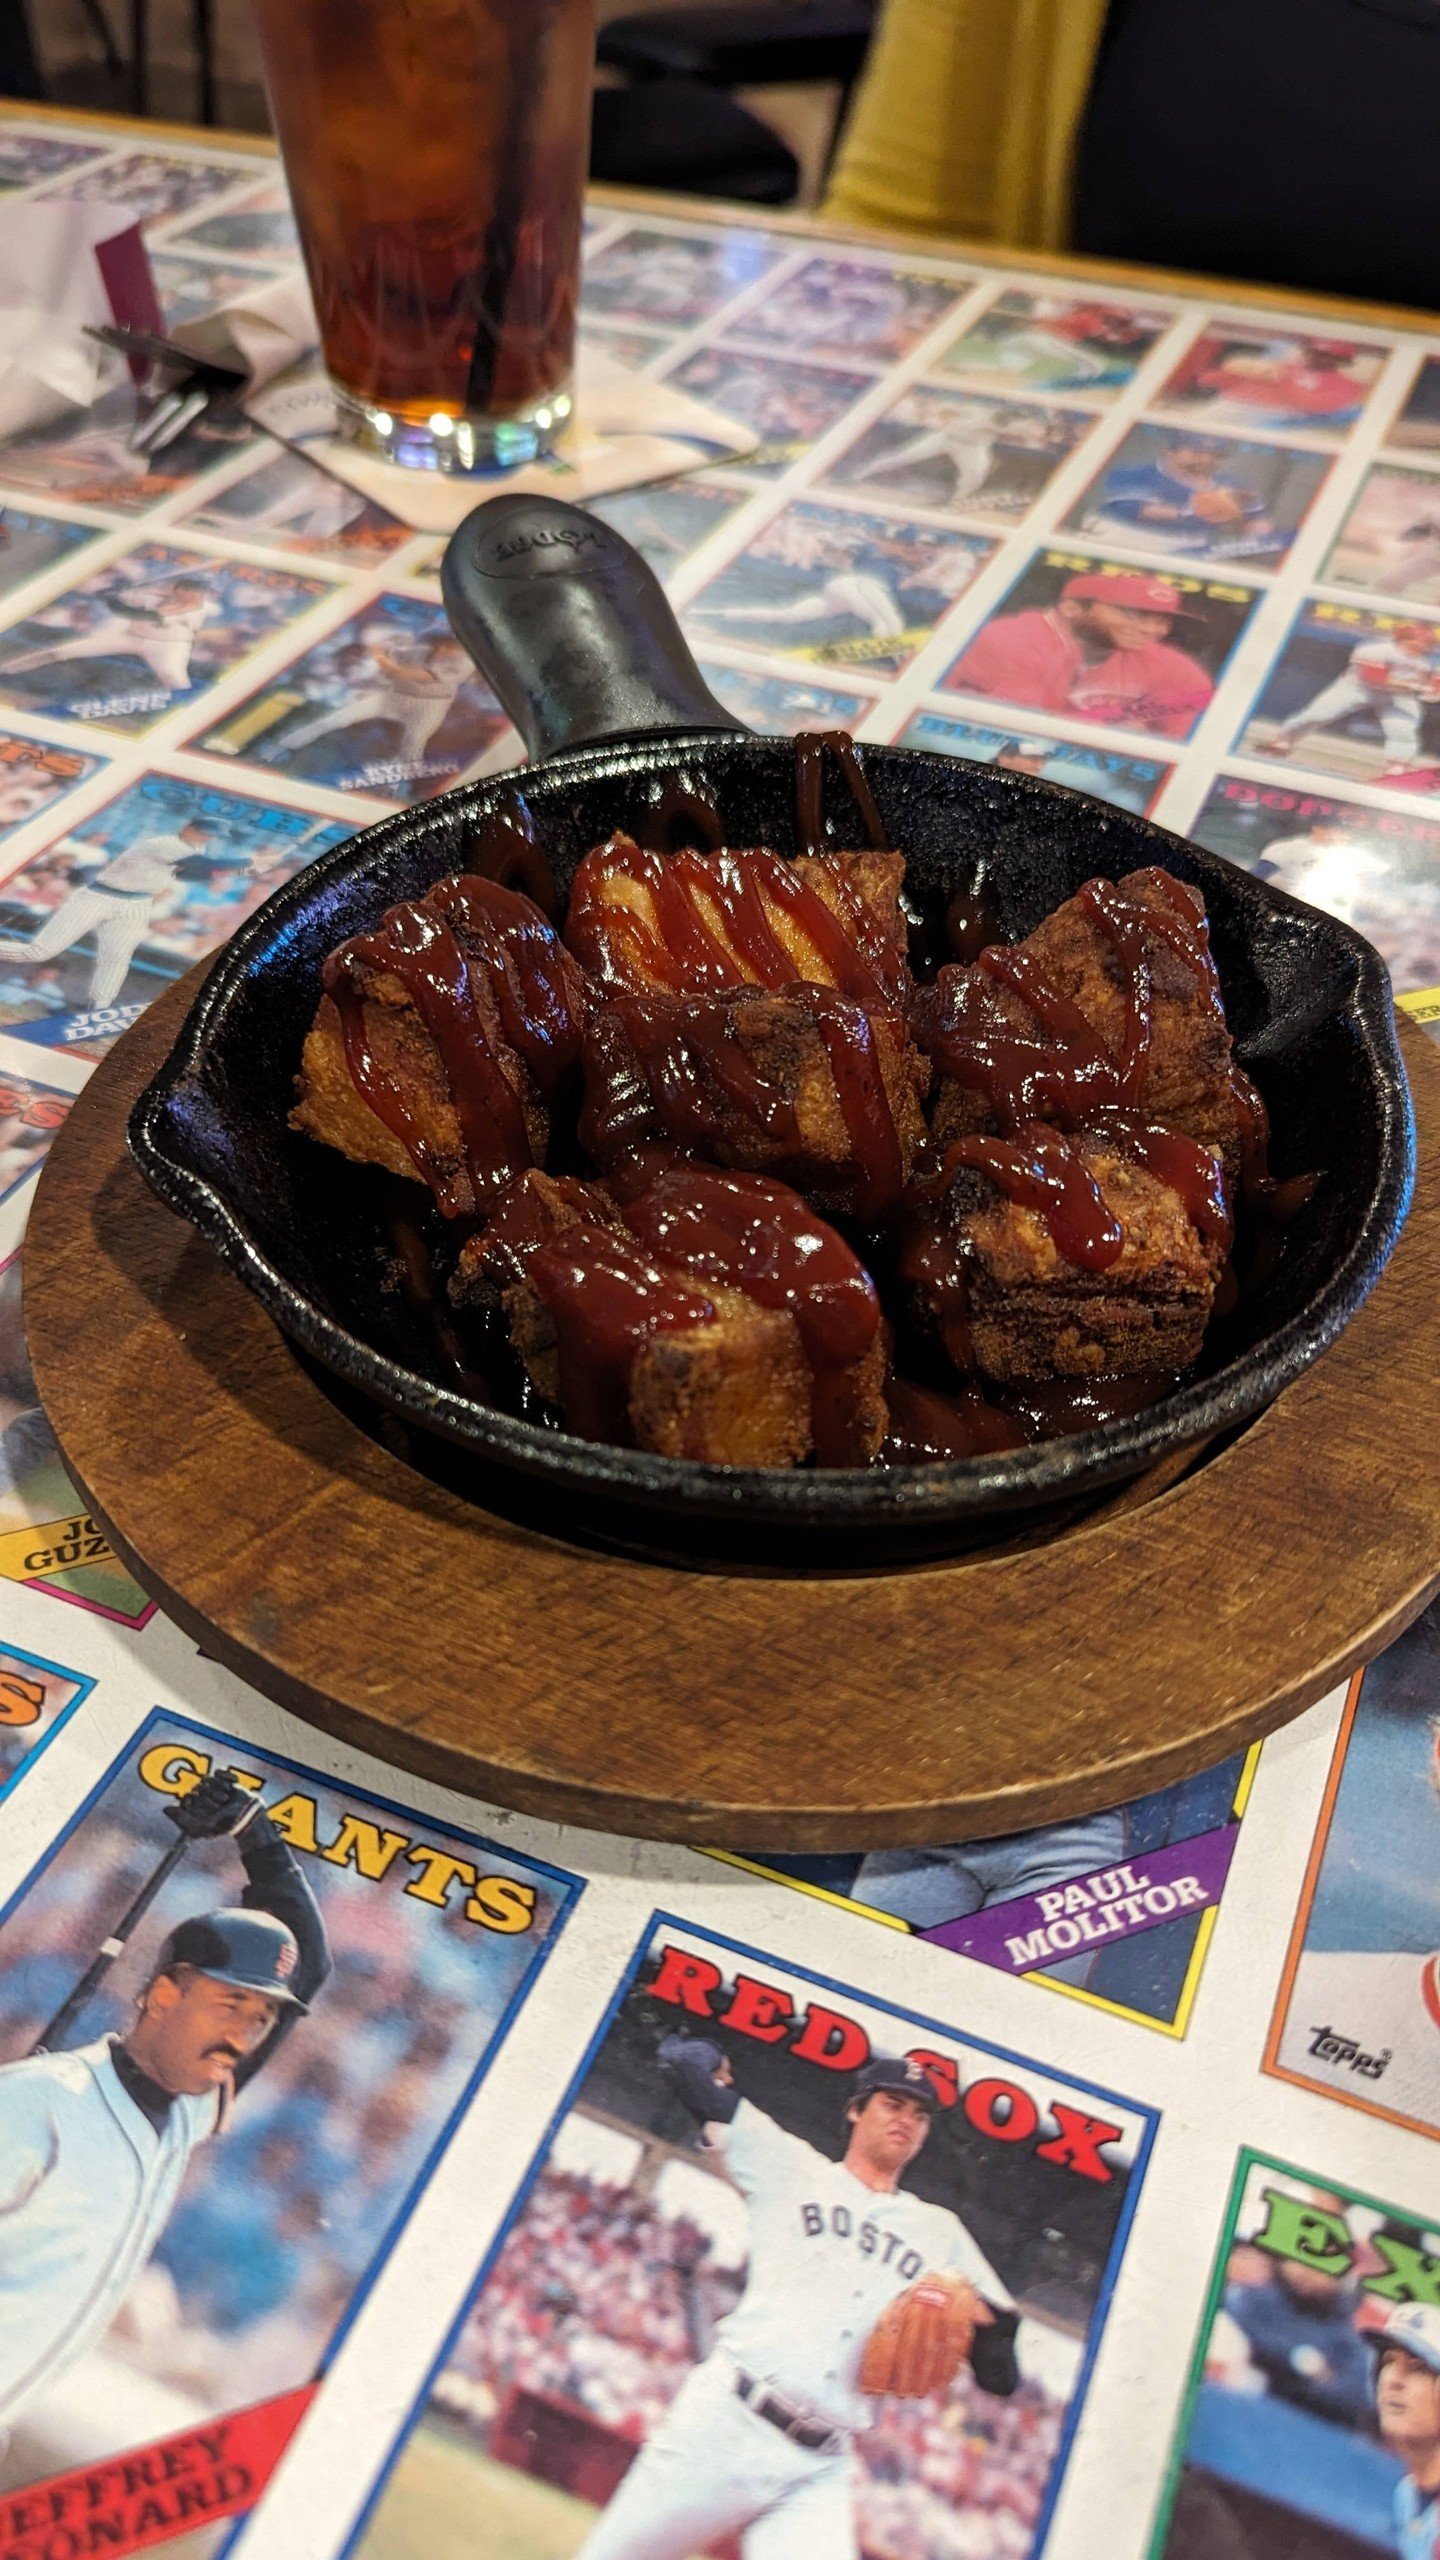 BELLY BITES

Smoked pork belly deep fried and drizzled with BBQ sauce